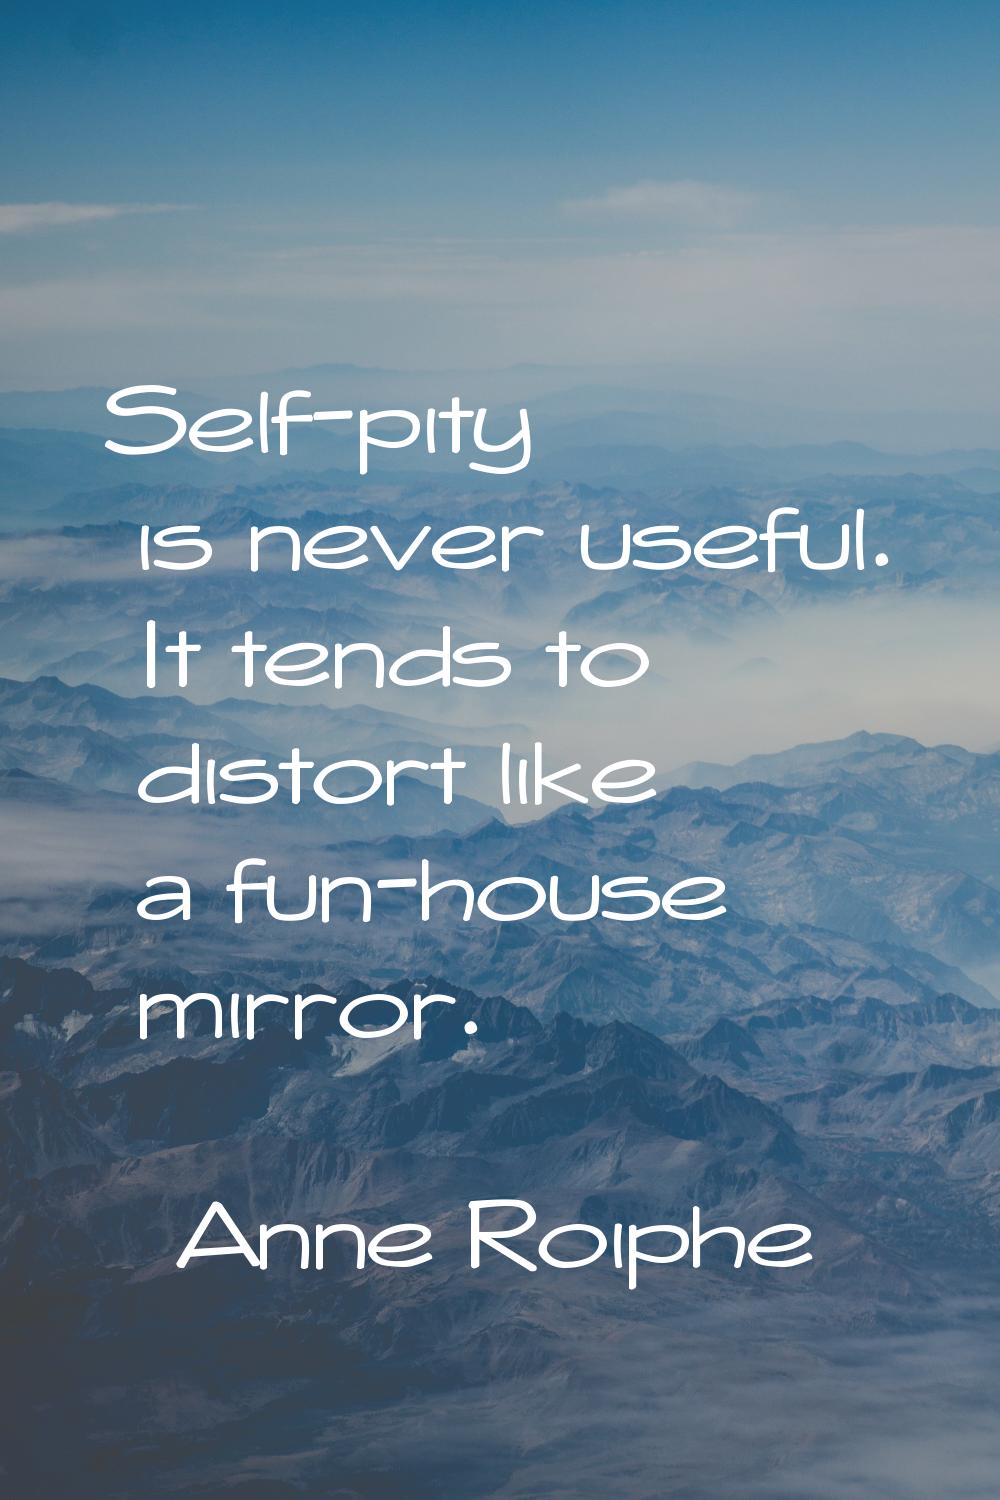 Self-pity is never useful. It tends to distort like a fun-house mirror.